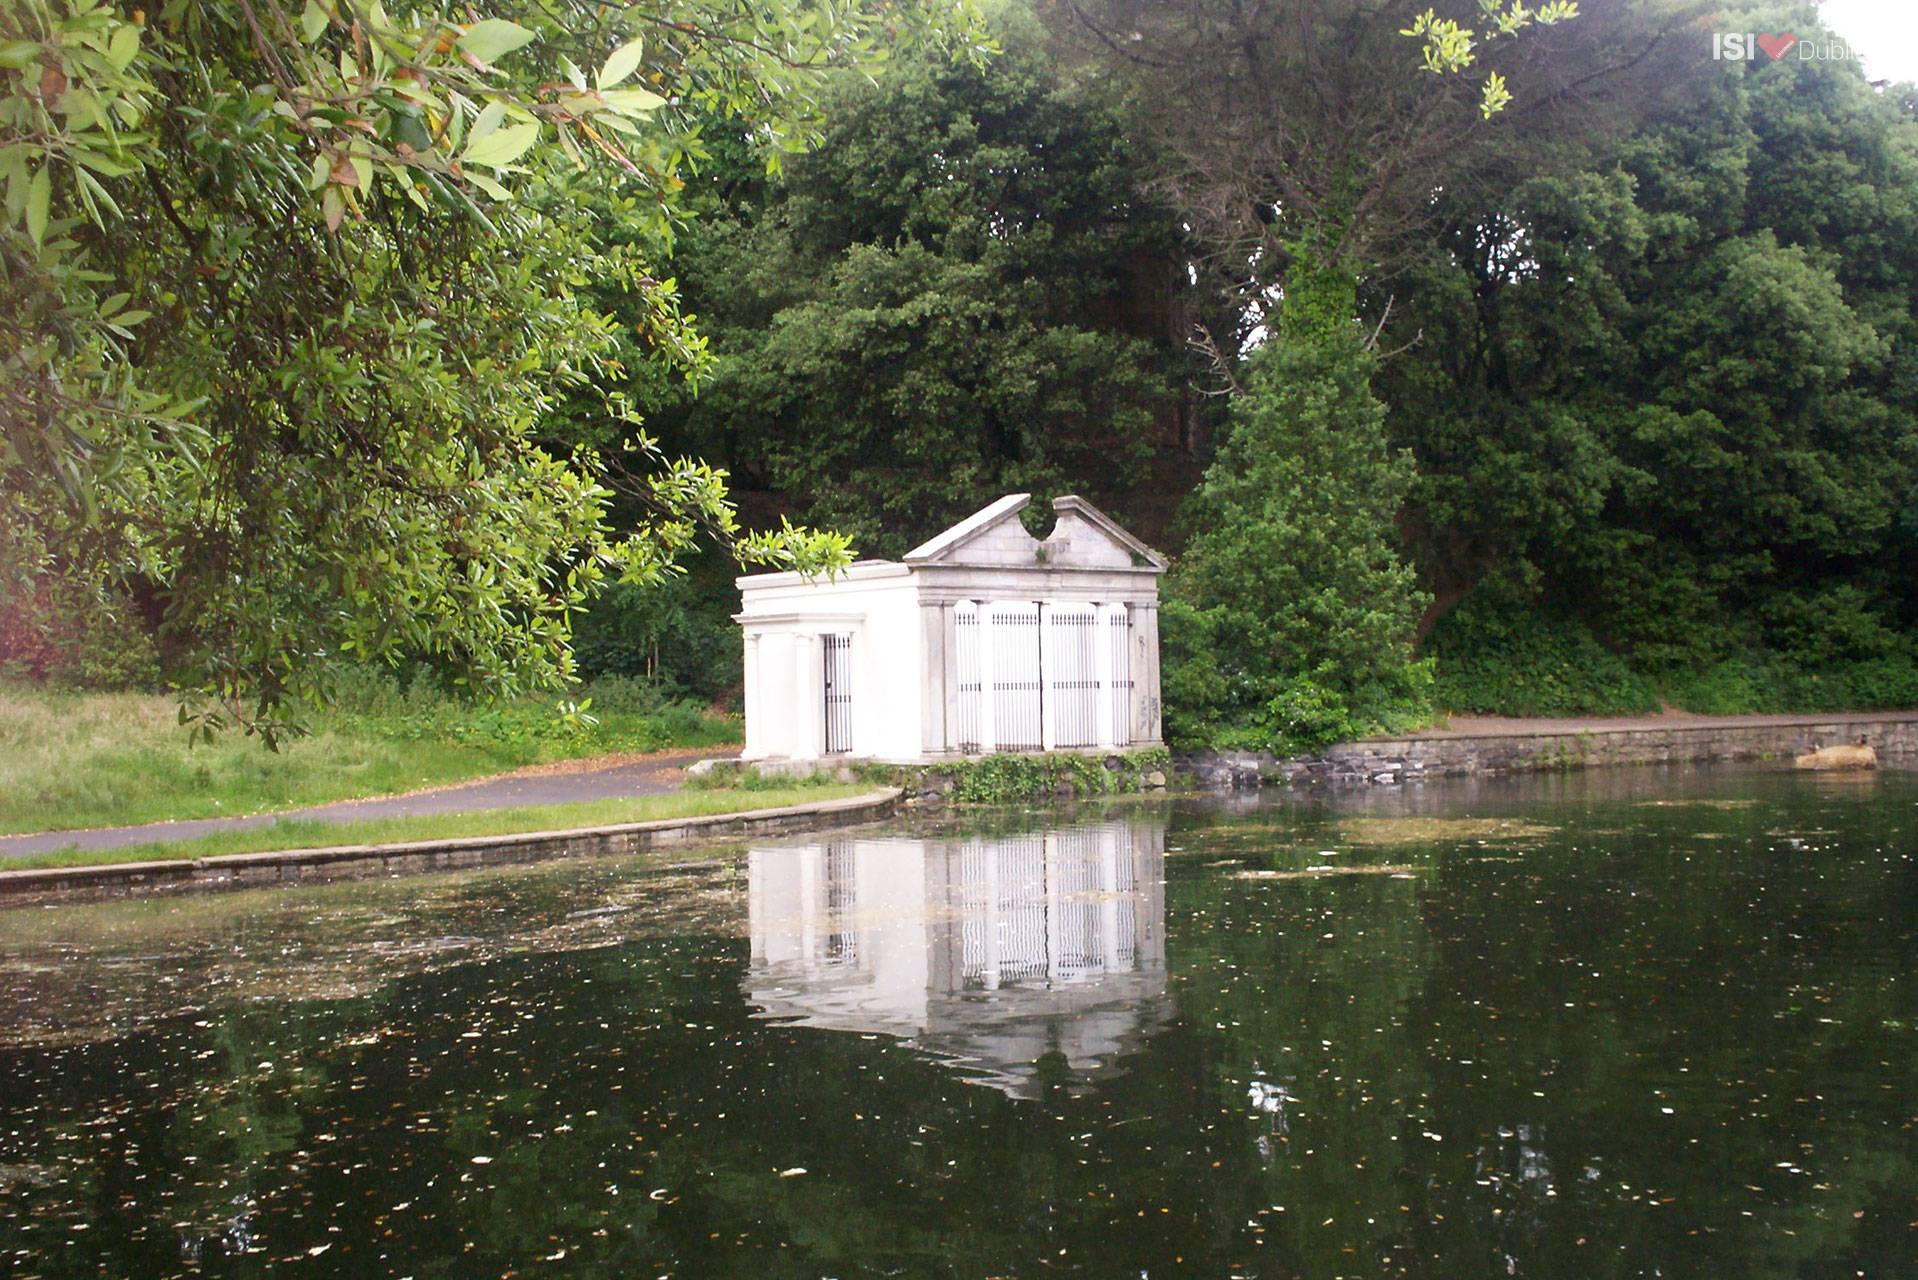 The Temple of Isis at Saint Anne's Park